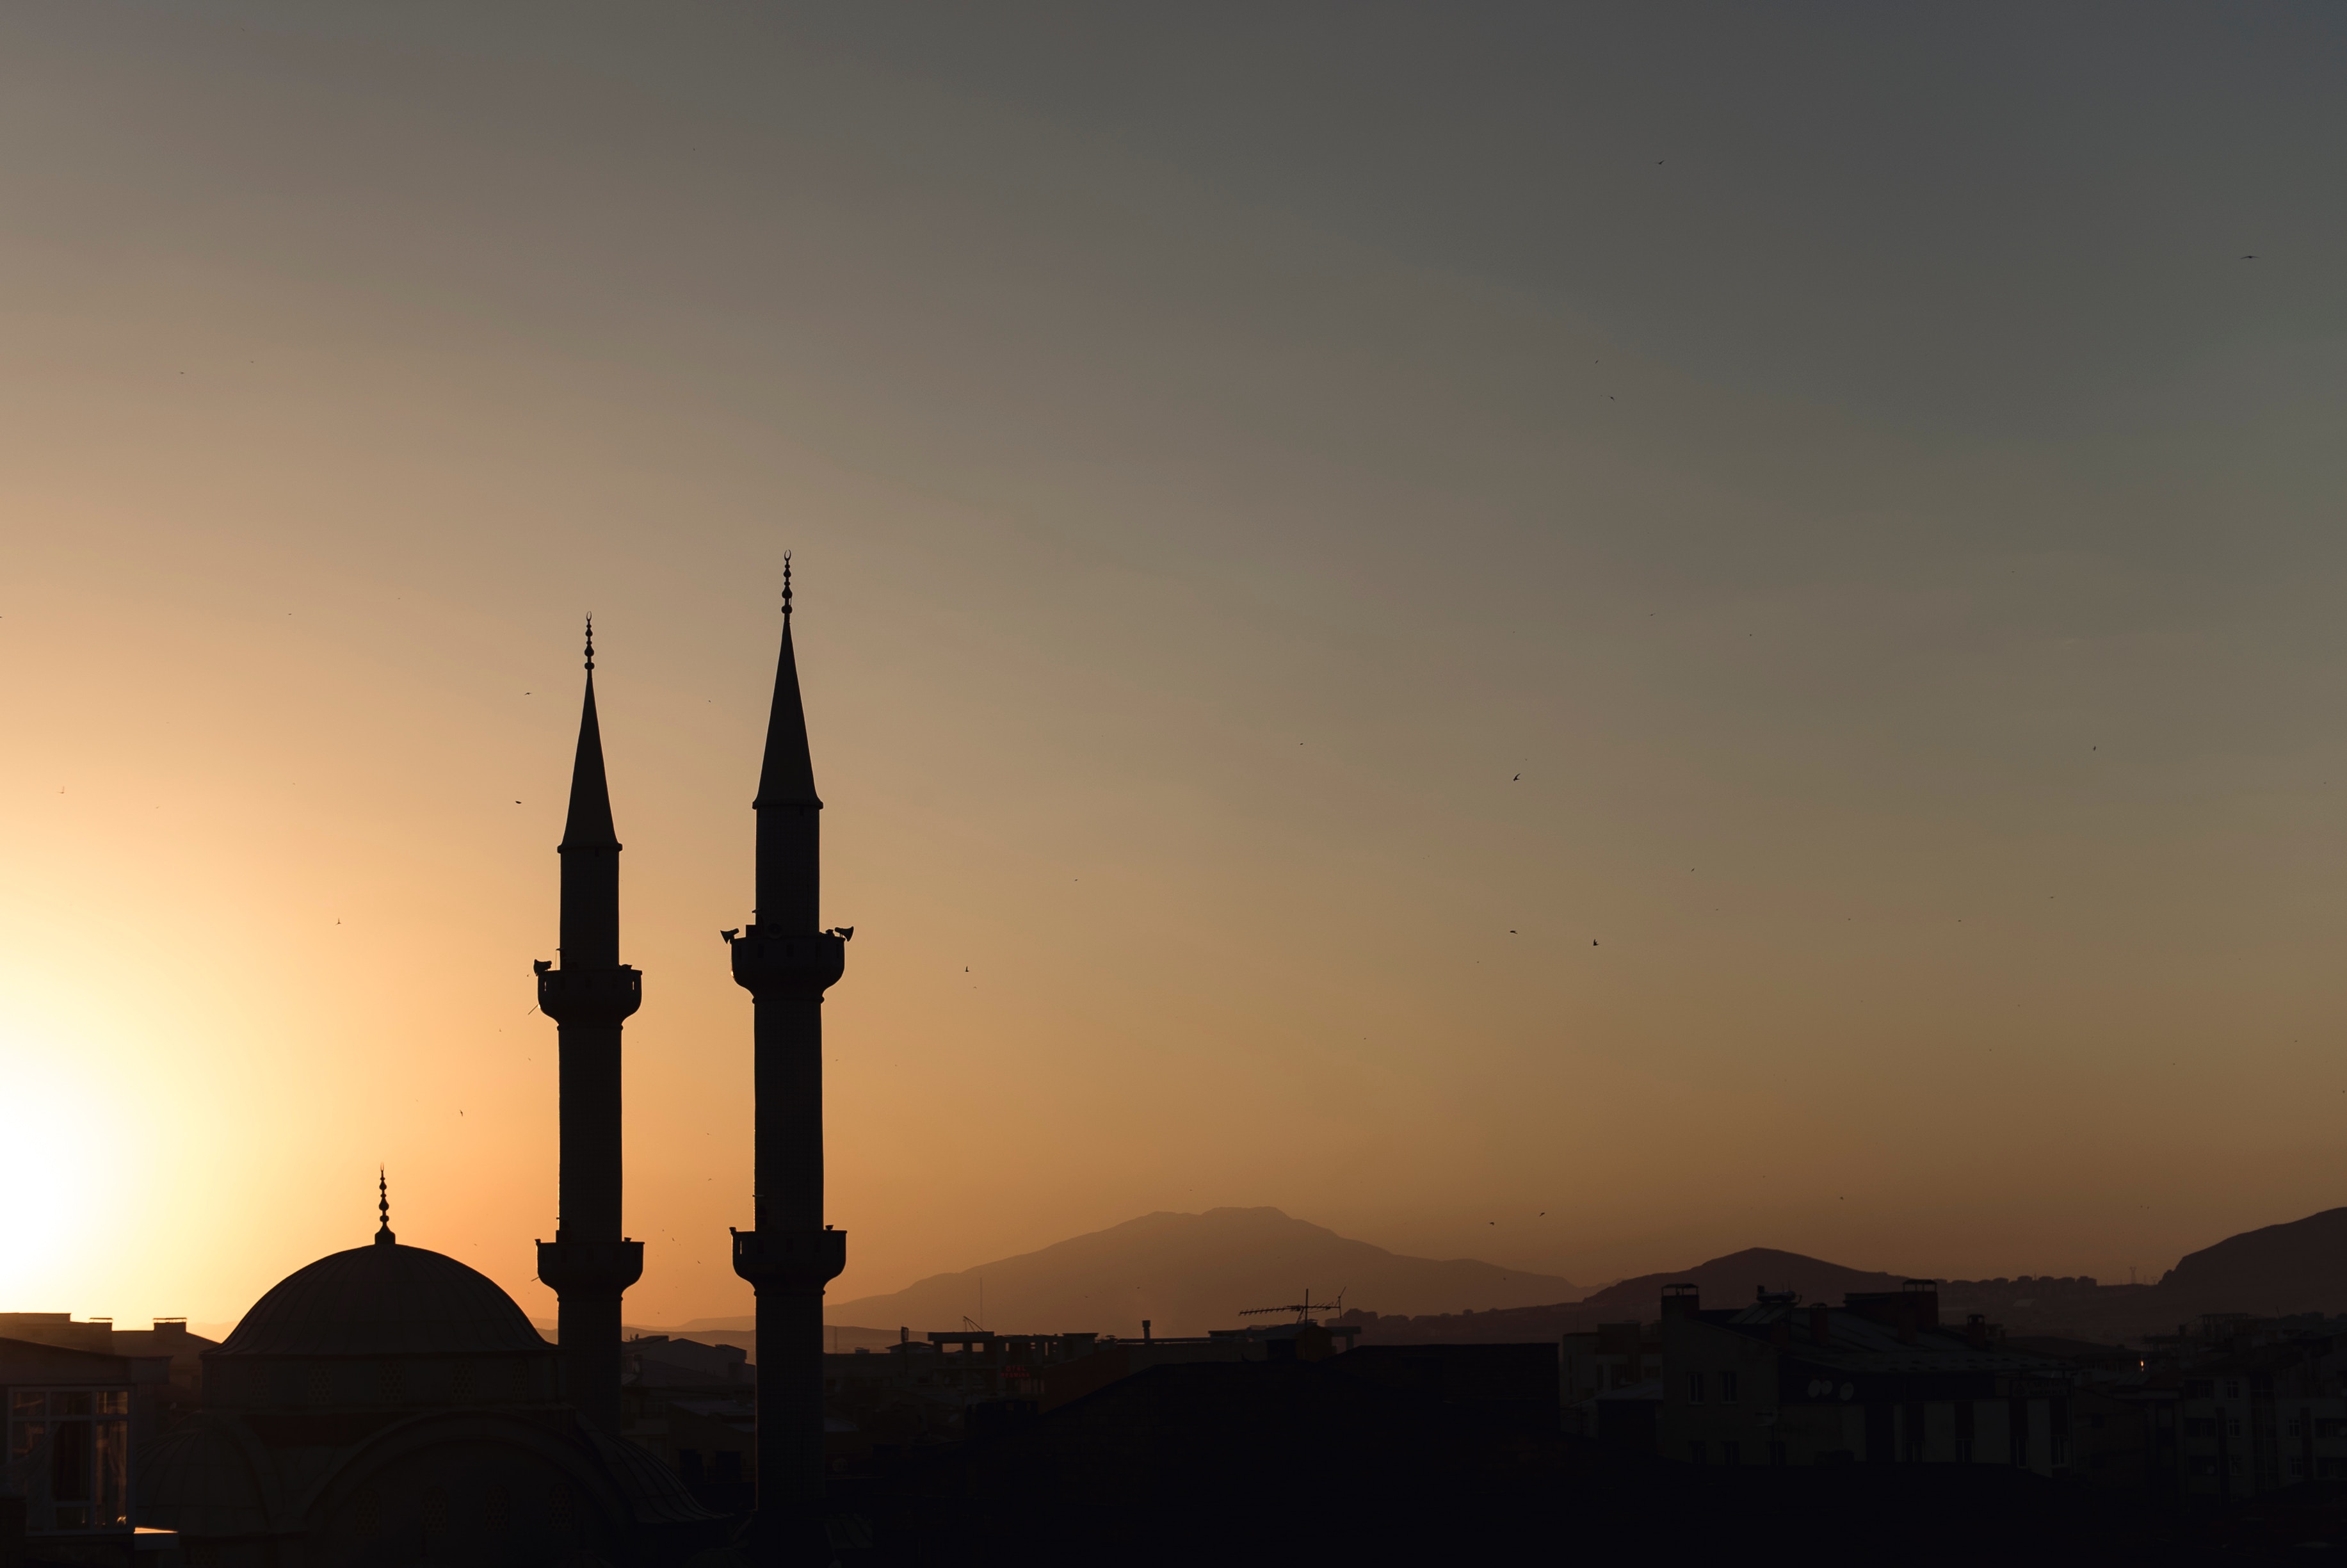 Sunset over dome and minarets